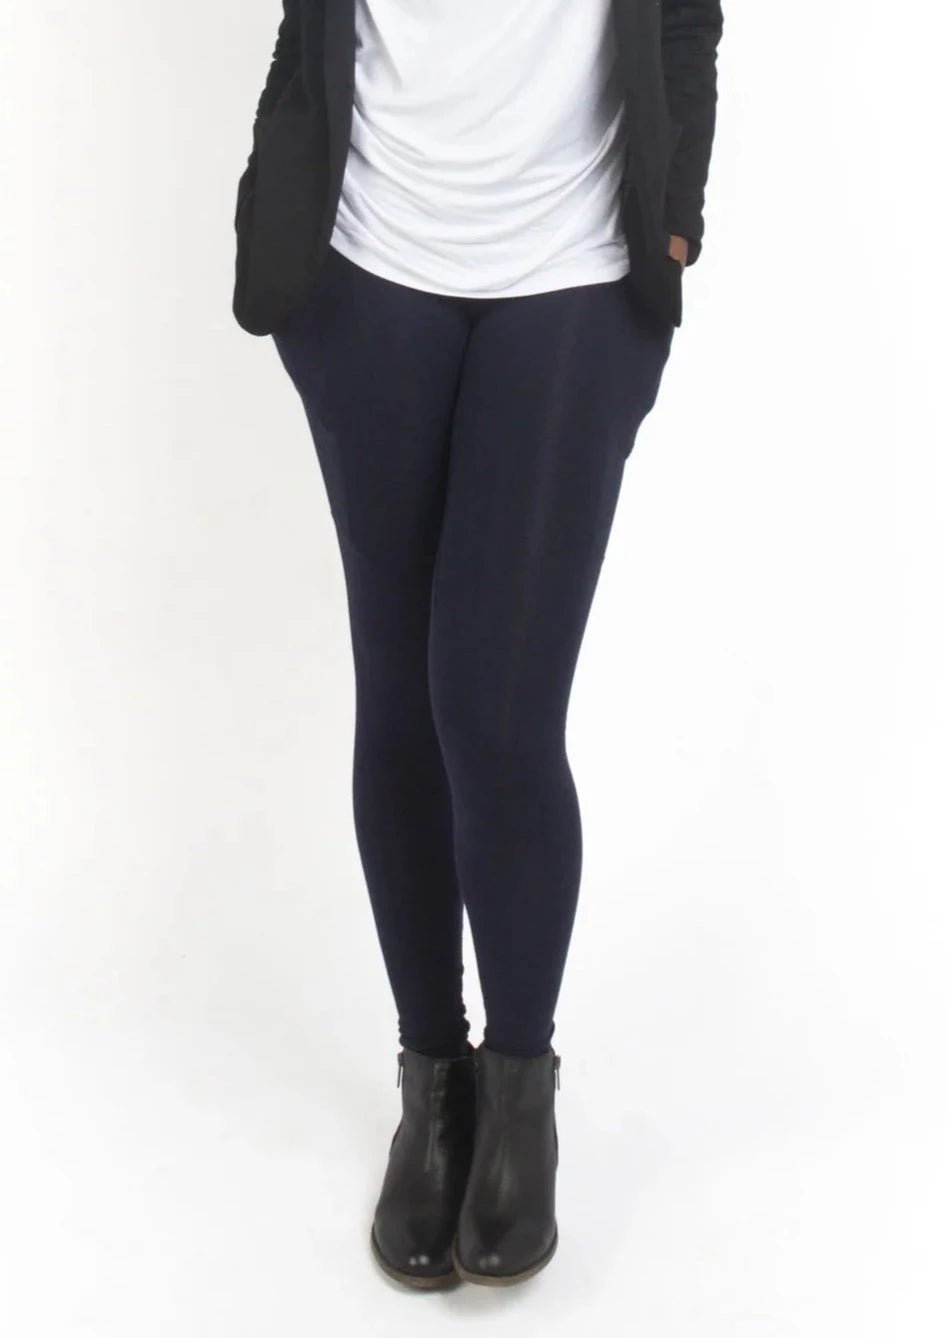 Organic Cotton Ankle Leggings - in Black, Navy, Slate Grey, French Roast,  or Midnight Blue